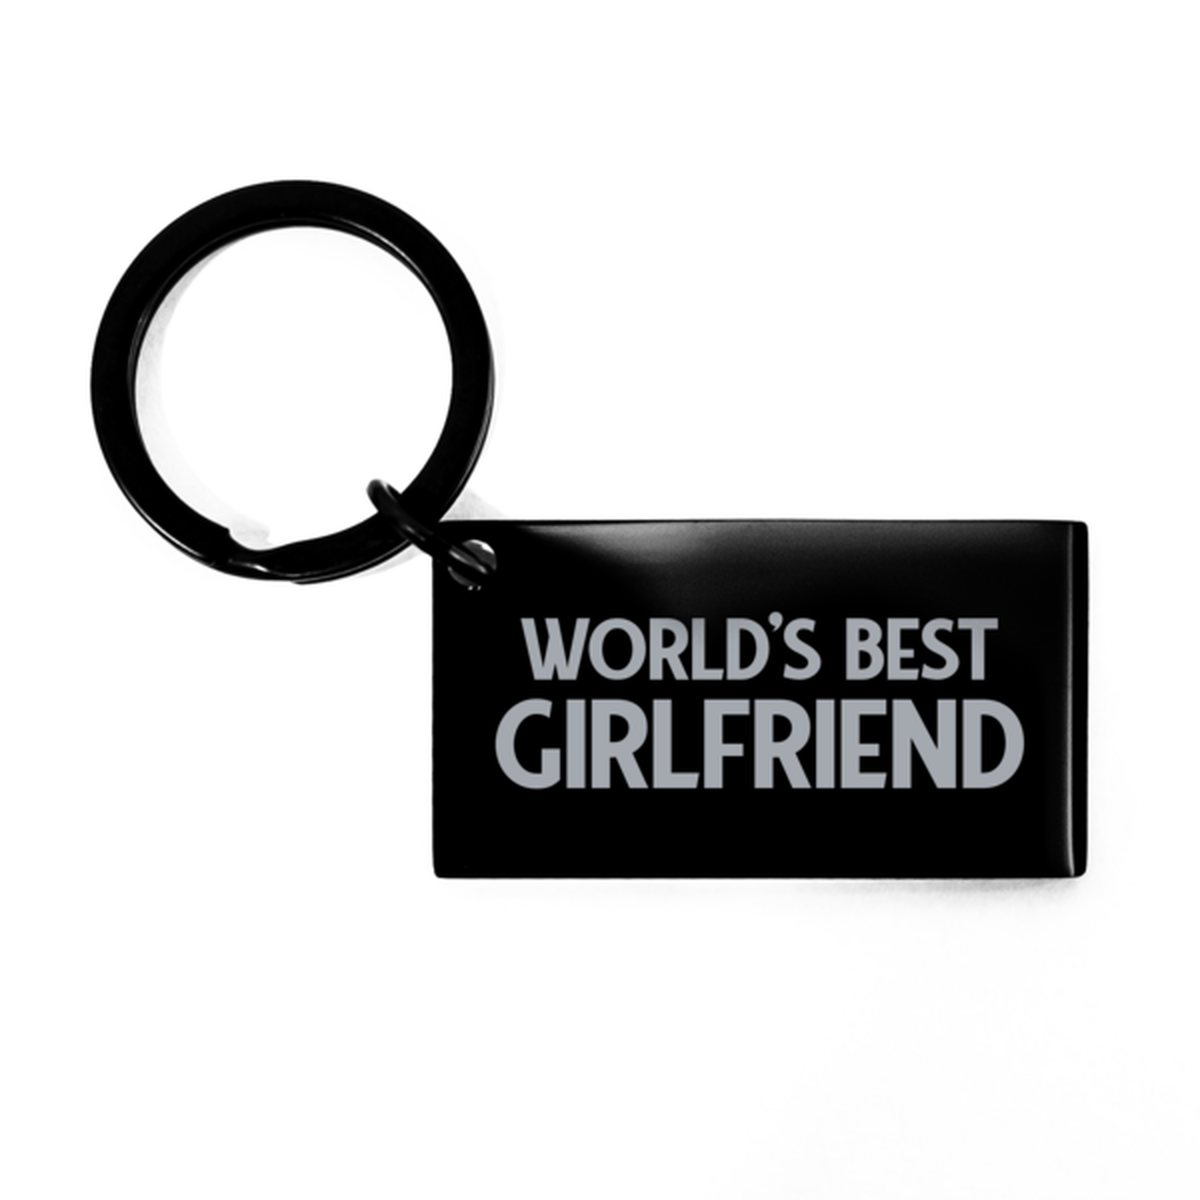 Worlds Best Girlfriend Gifts, Funny Black Engraved Keychain For Girlfriend, Birthday Presents For Women